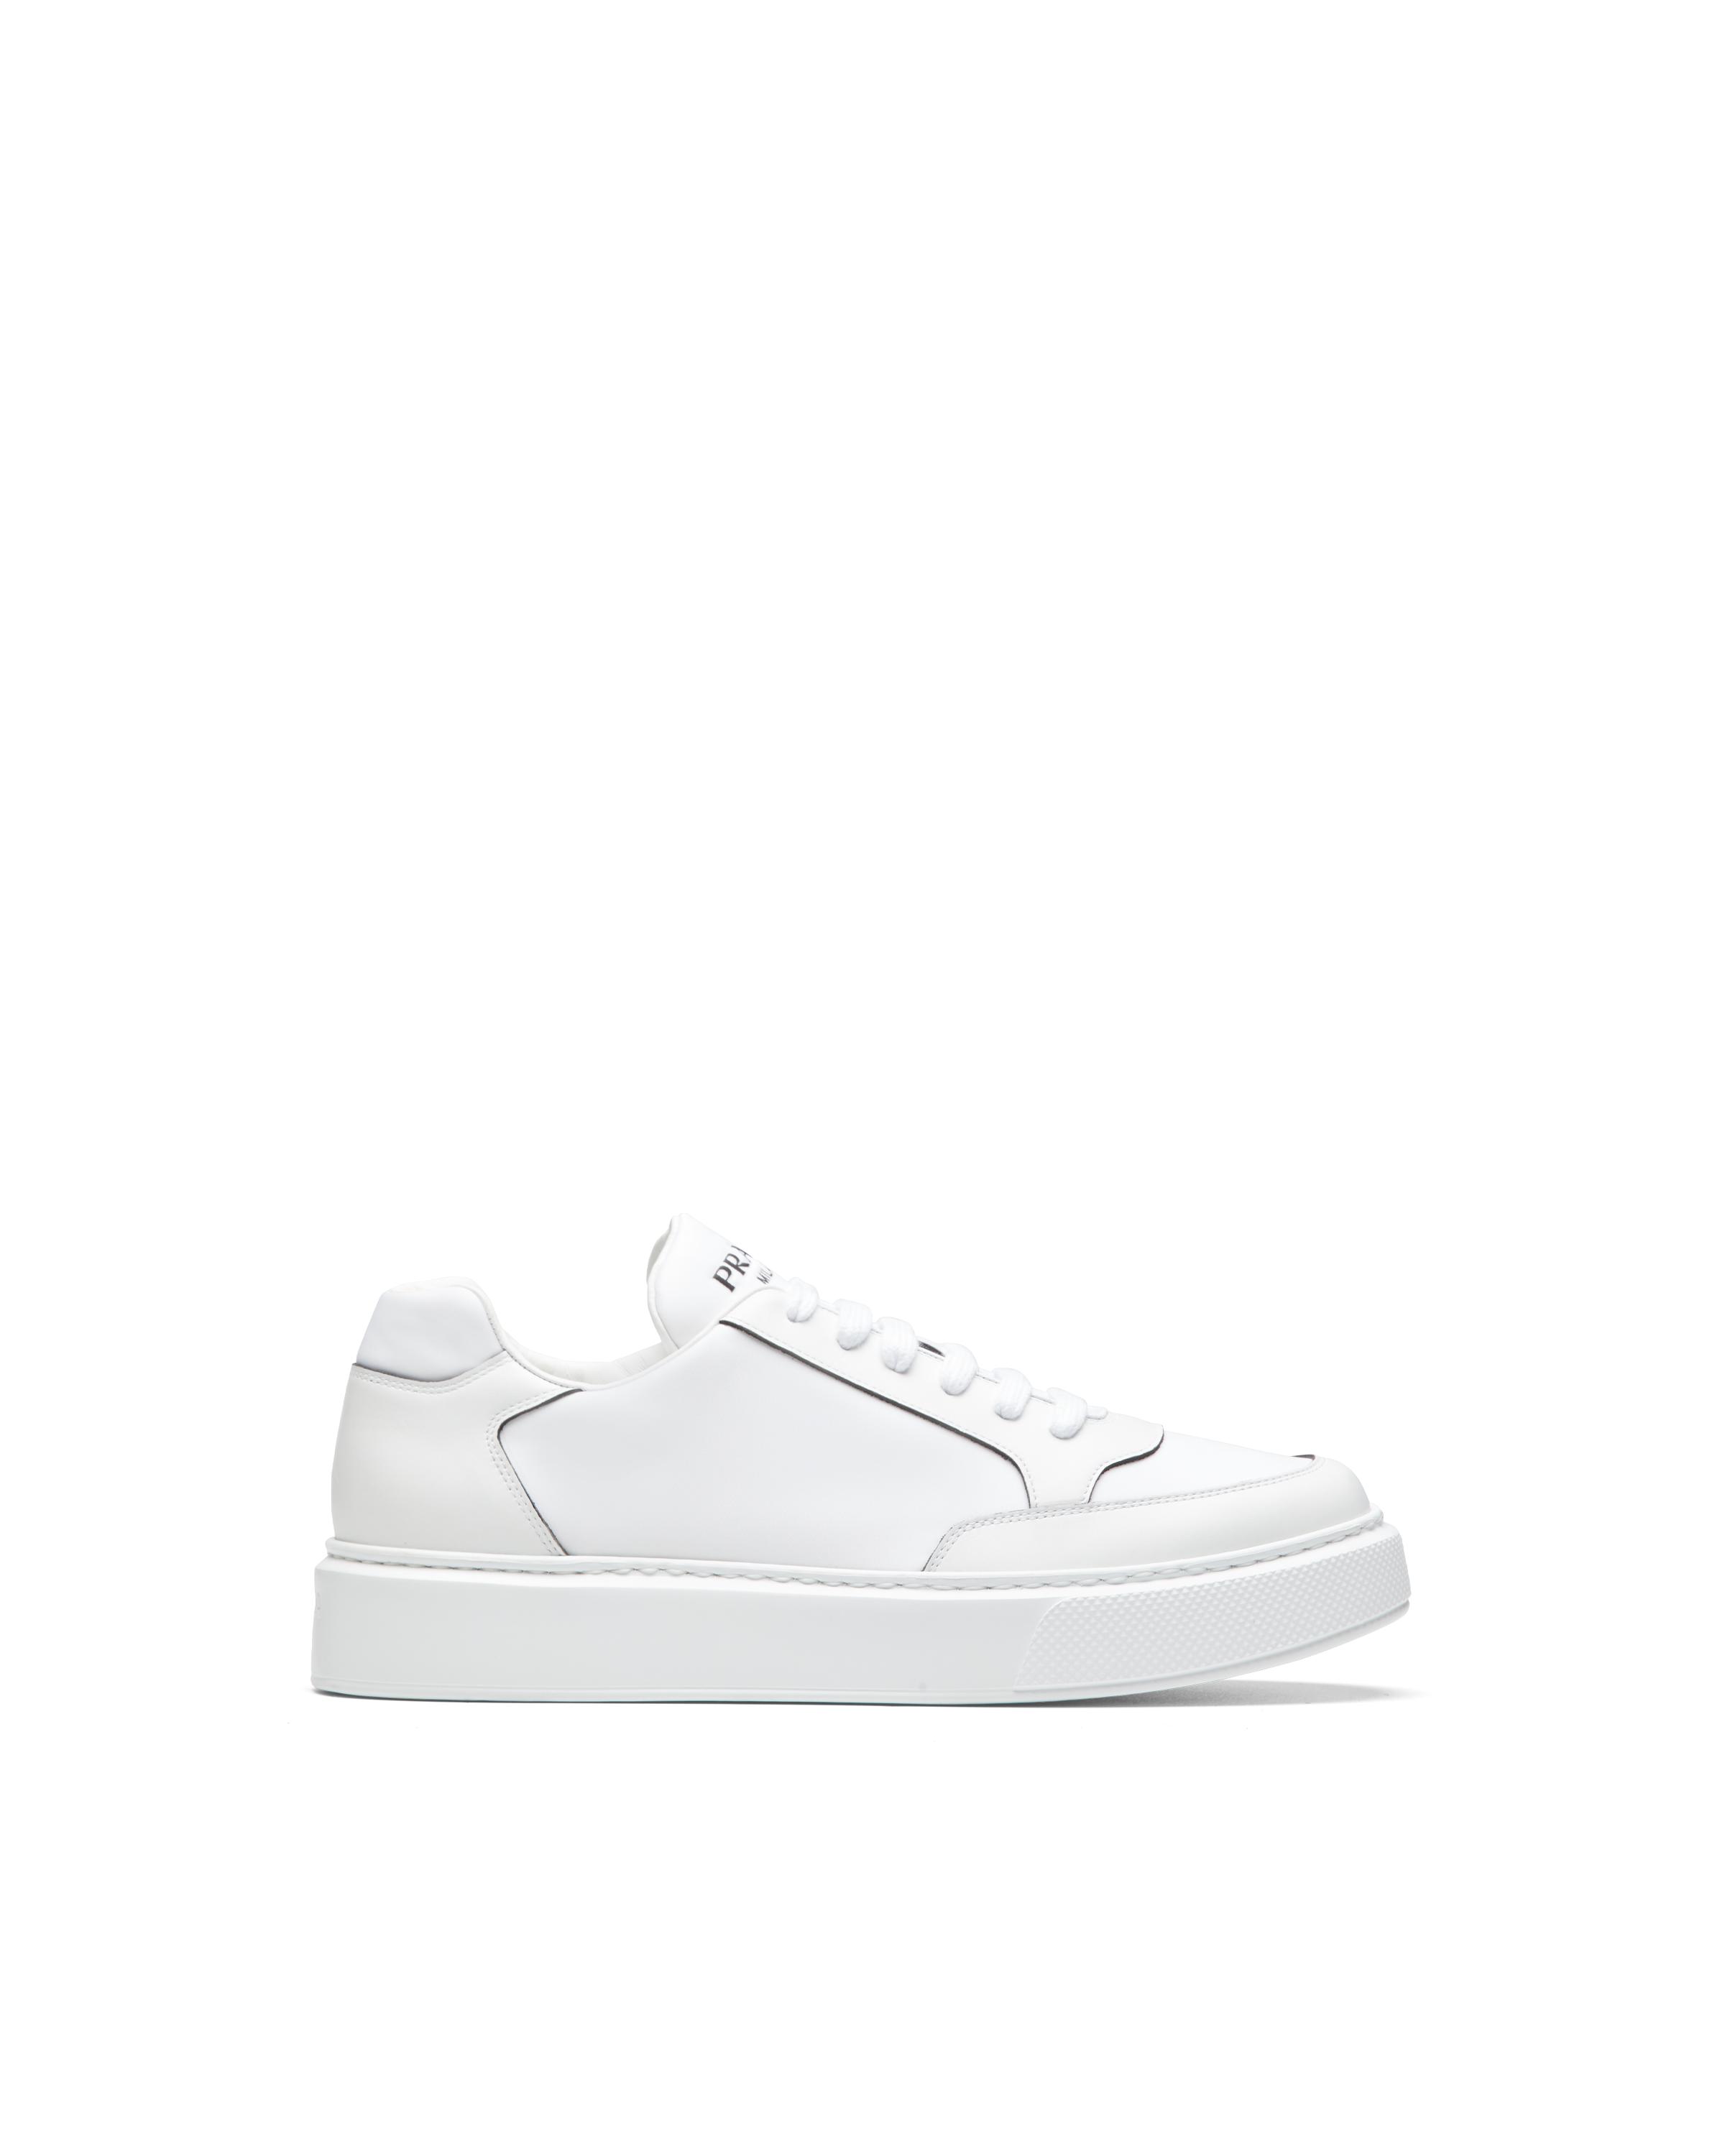 Prada Macro Leather And Nylon Sneakers in White for Men | Lyst